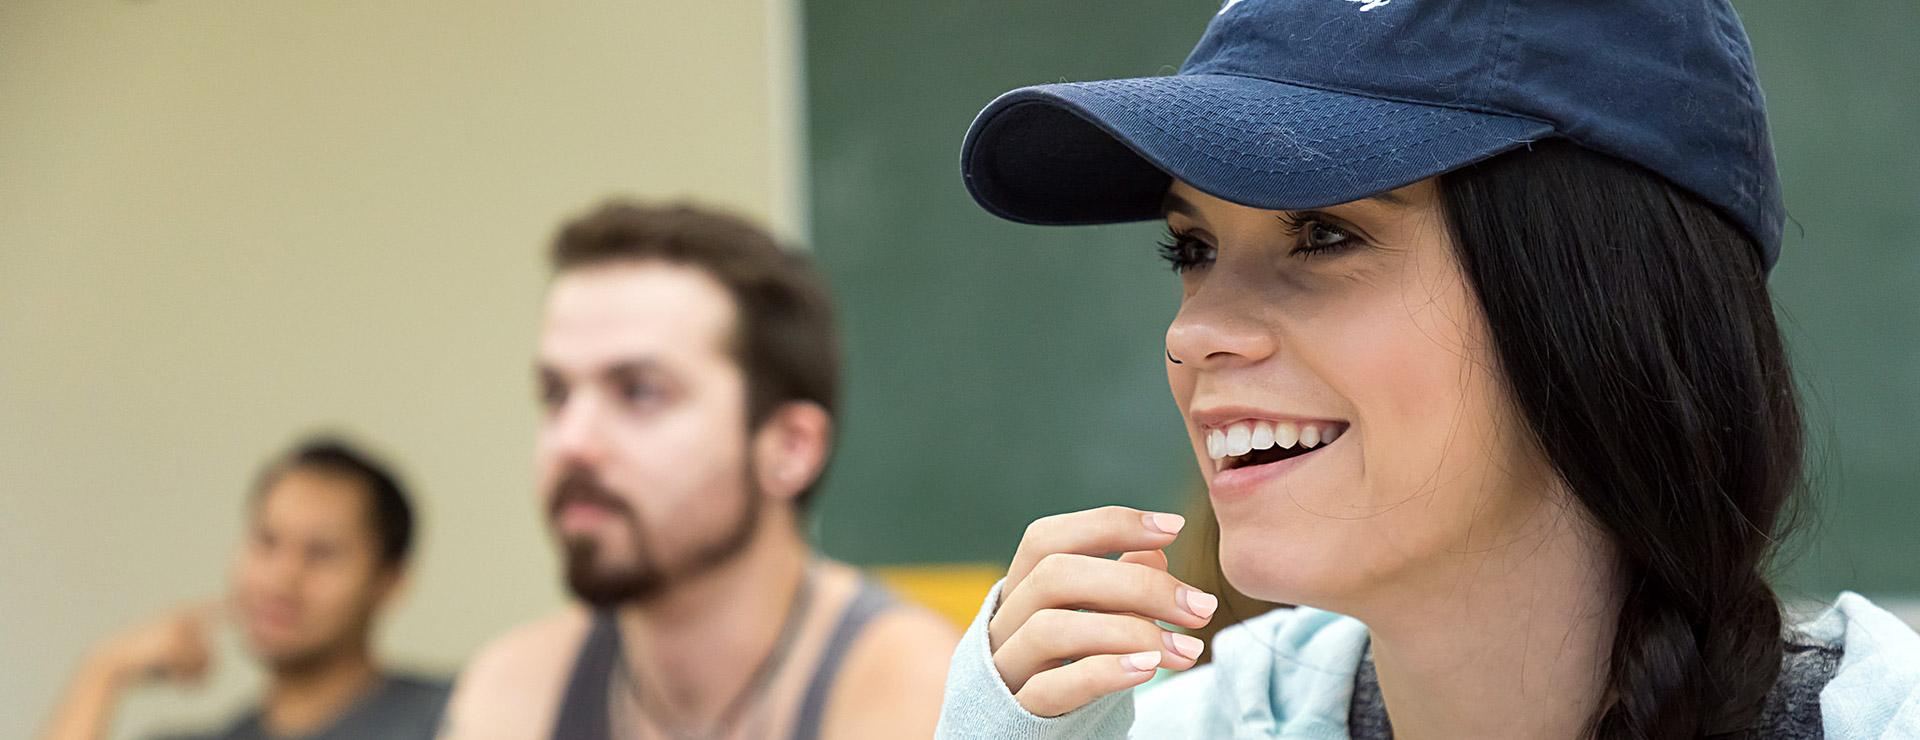 Female student smiling in class as other students look on